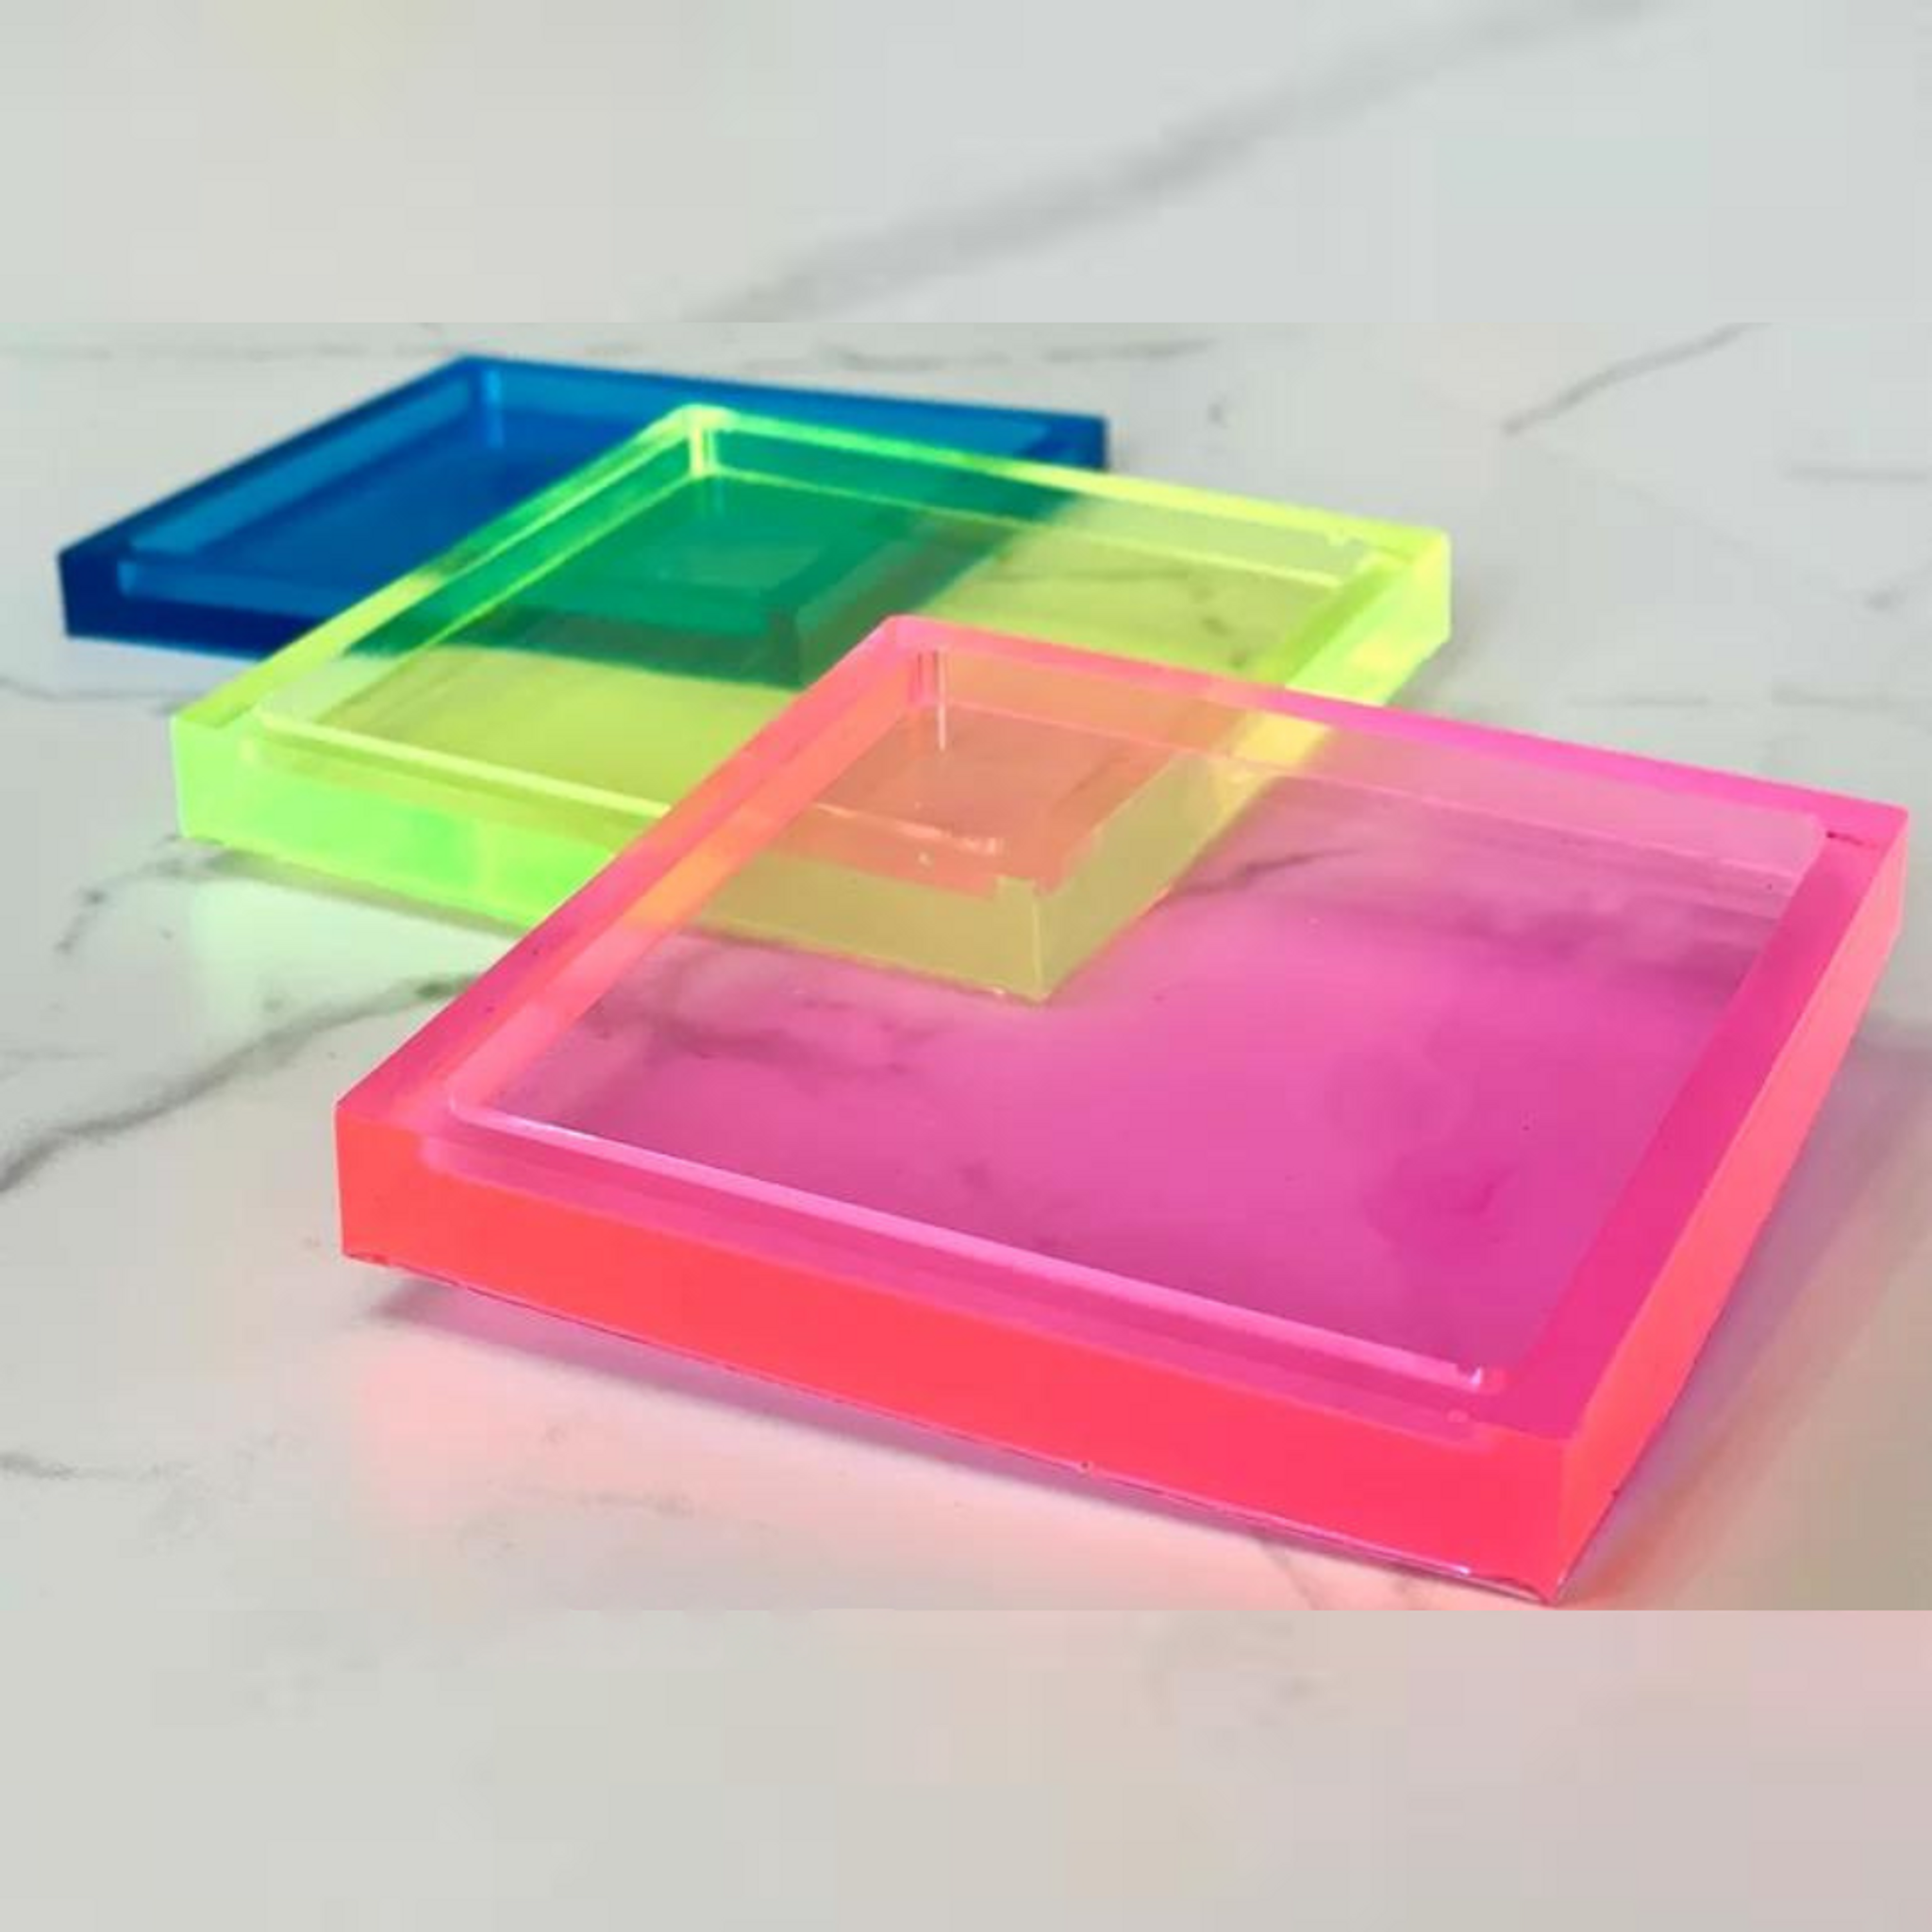 Set of 4 Neon Color Resin Coasters